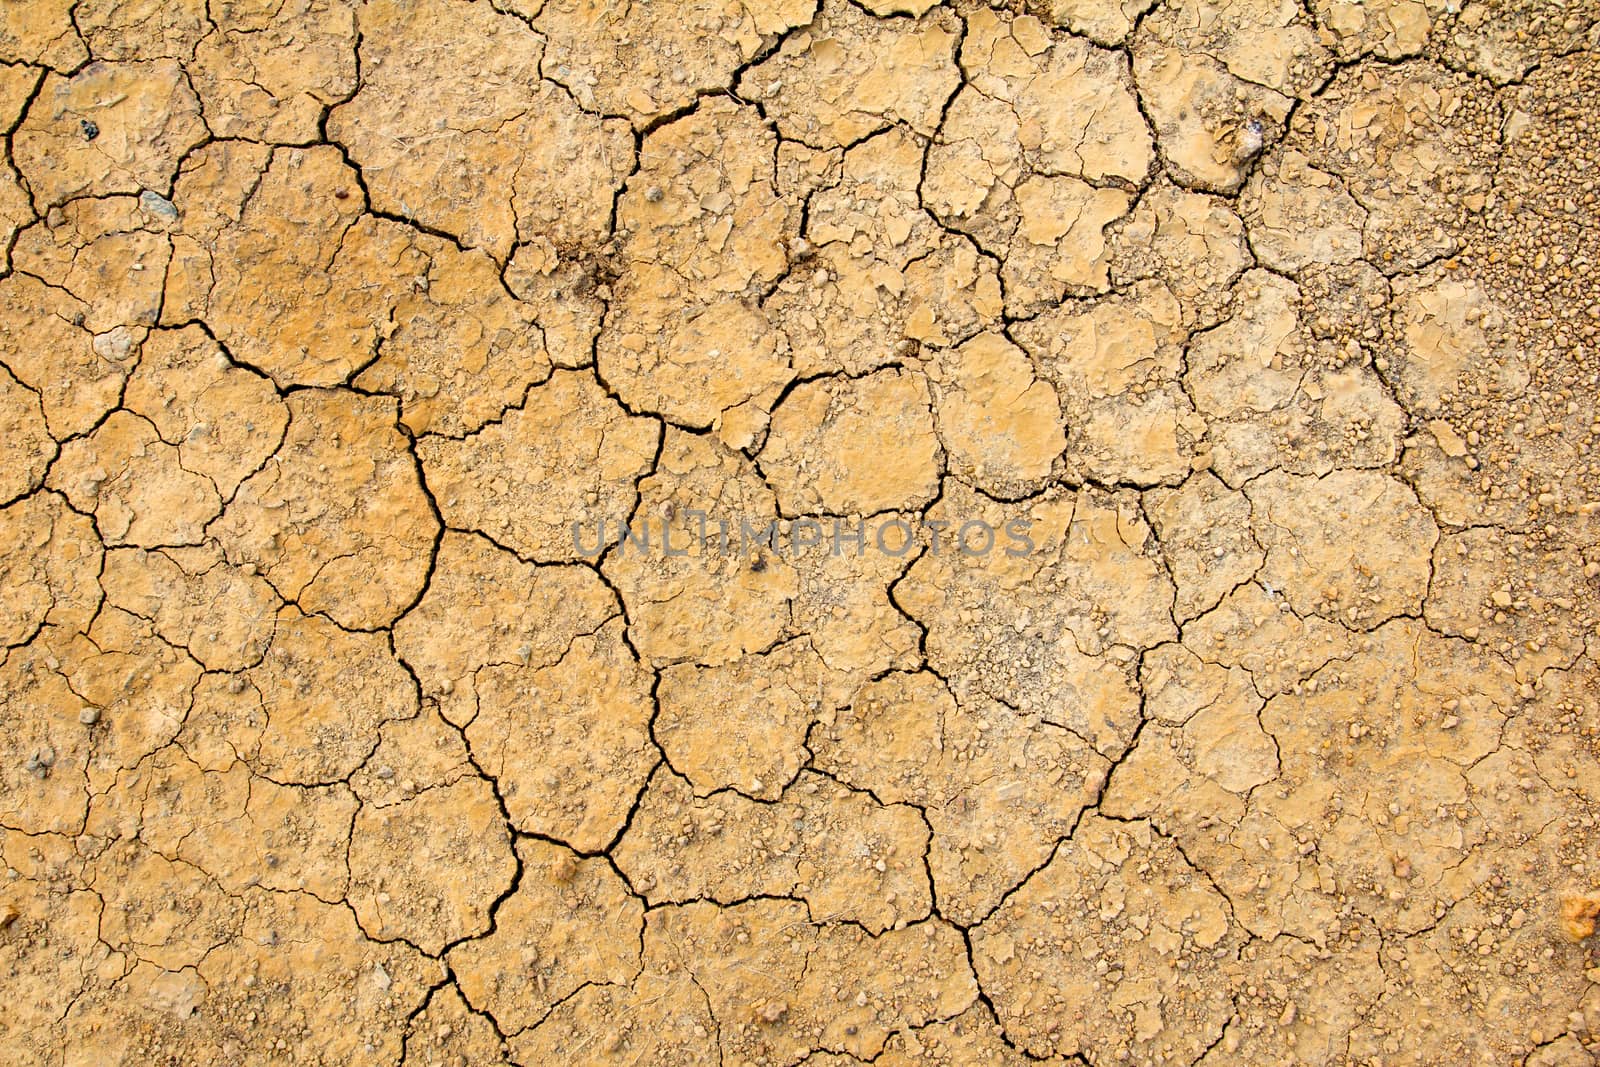 Cracked dry brown soil background, global warming effect by Hengpattanapong